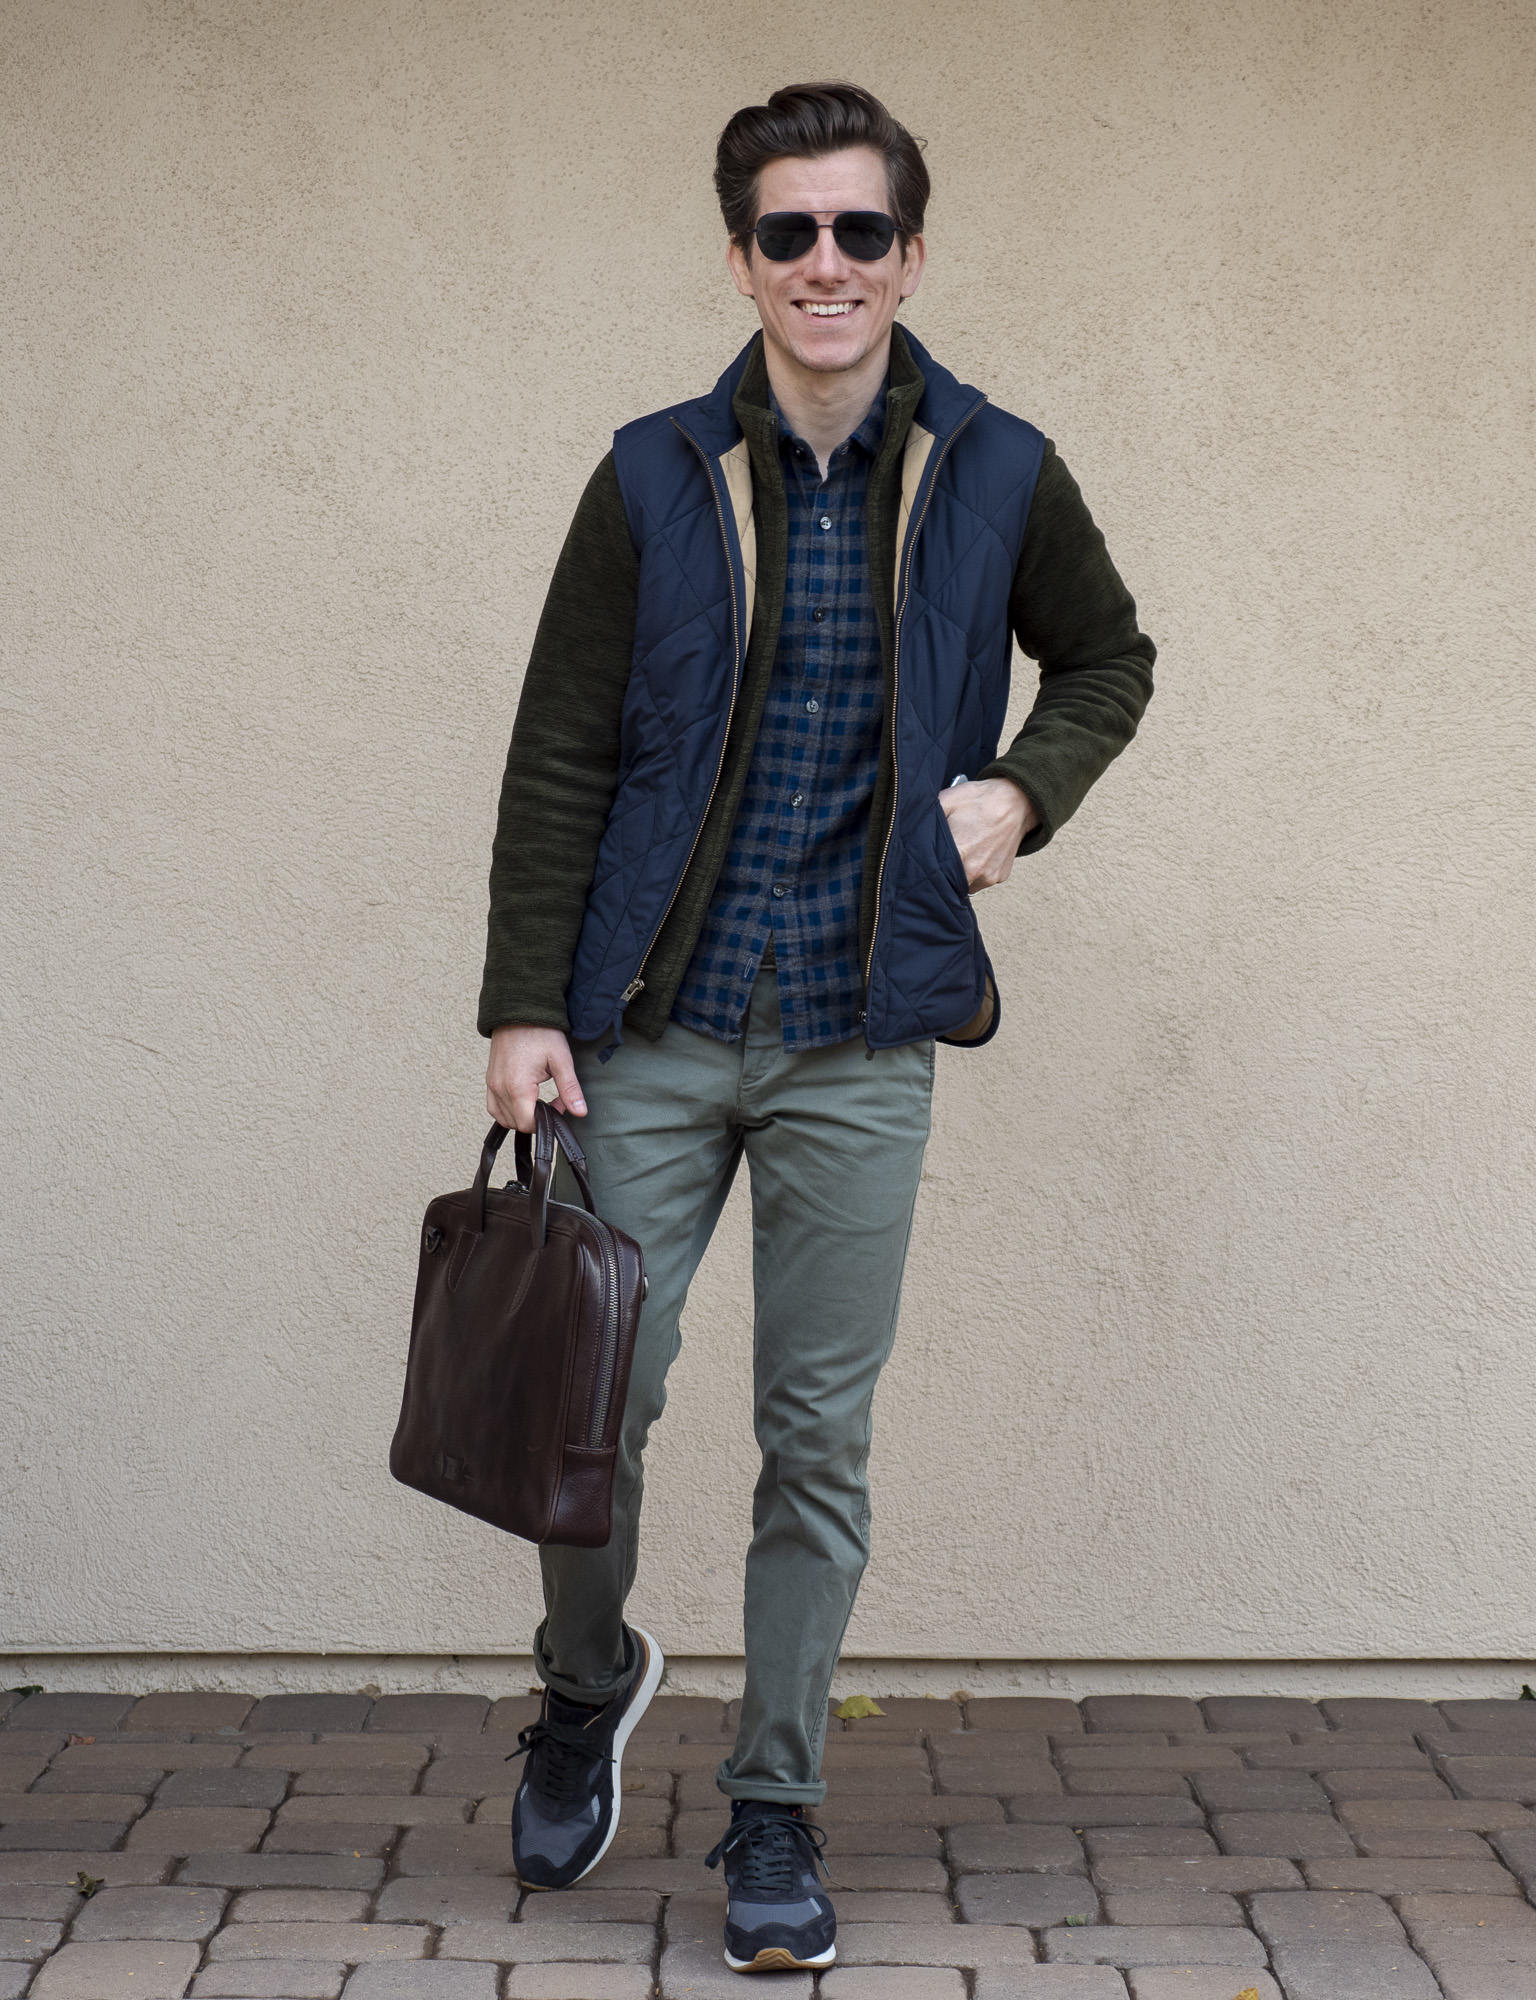 Flannel and fleece with vest